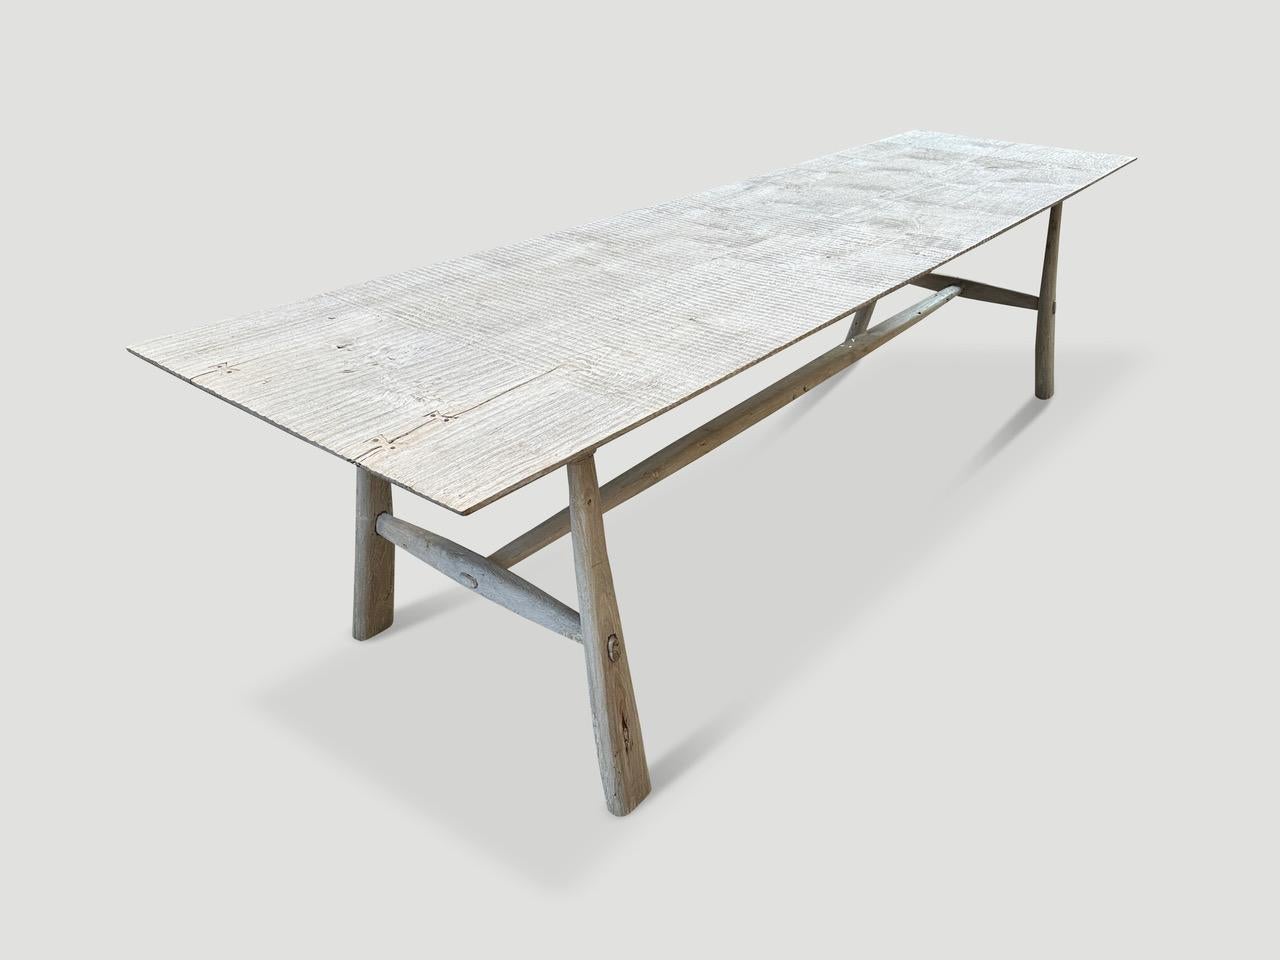 An impressive three inch thick single slab coffee table. Hand made from beautiful reclaimed teak wood, this stunning piece floats on mid-century style conical legs. Organic with a twist. Finished with a light white wash revealing the beautiful wood